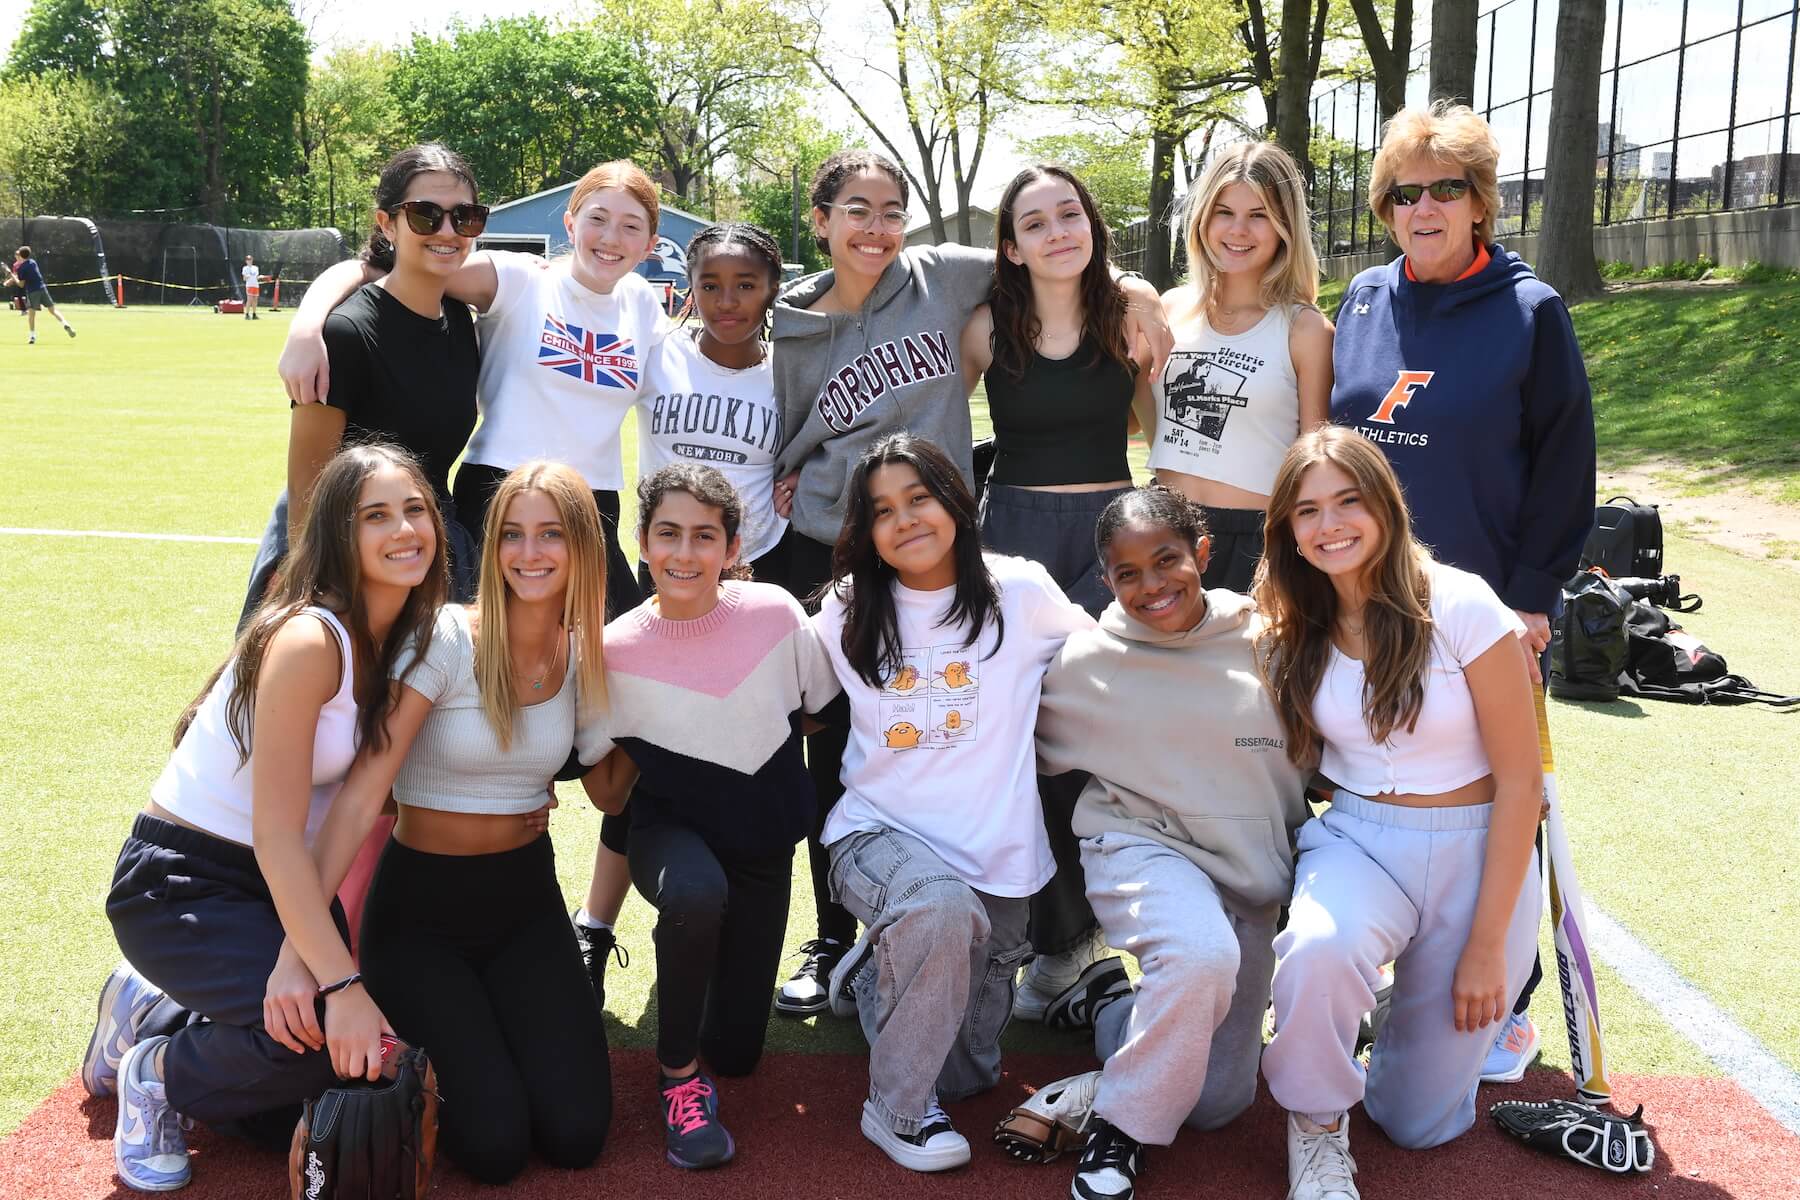 Group of Ethical Culture Fieldston School Middle School students smiling at camera on field